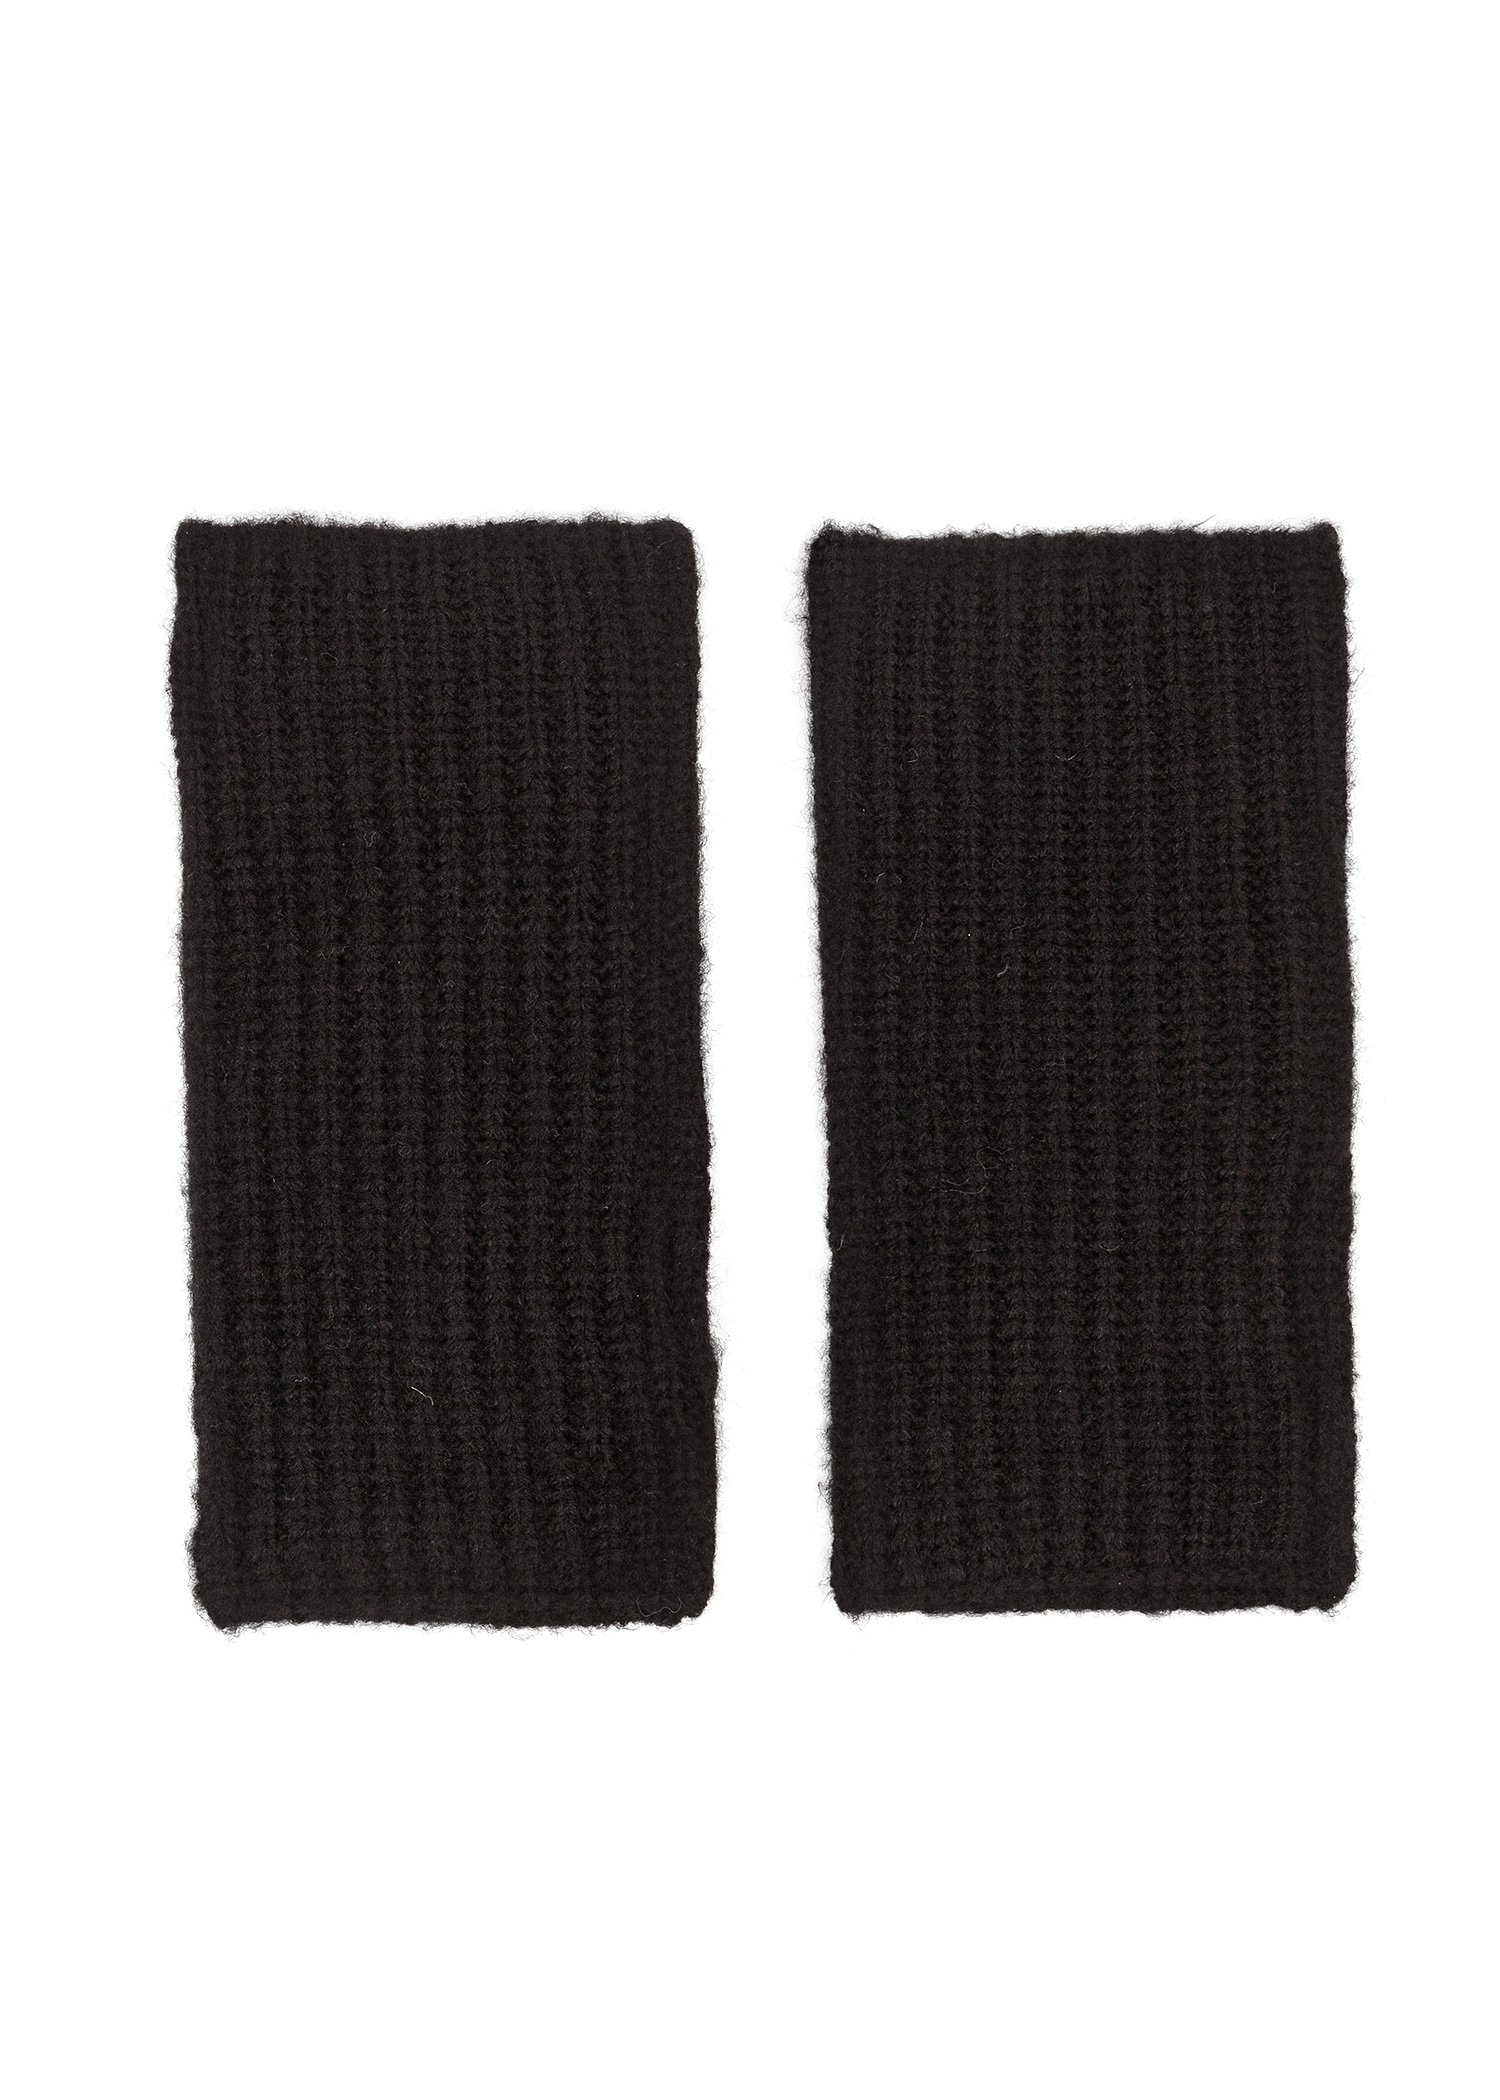 Cable knit wrist warmers